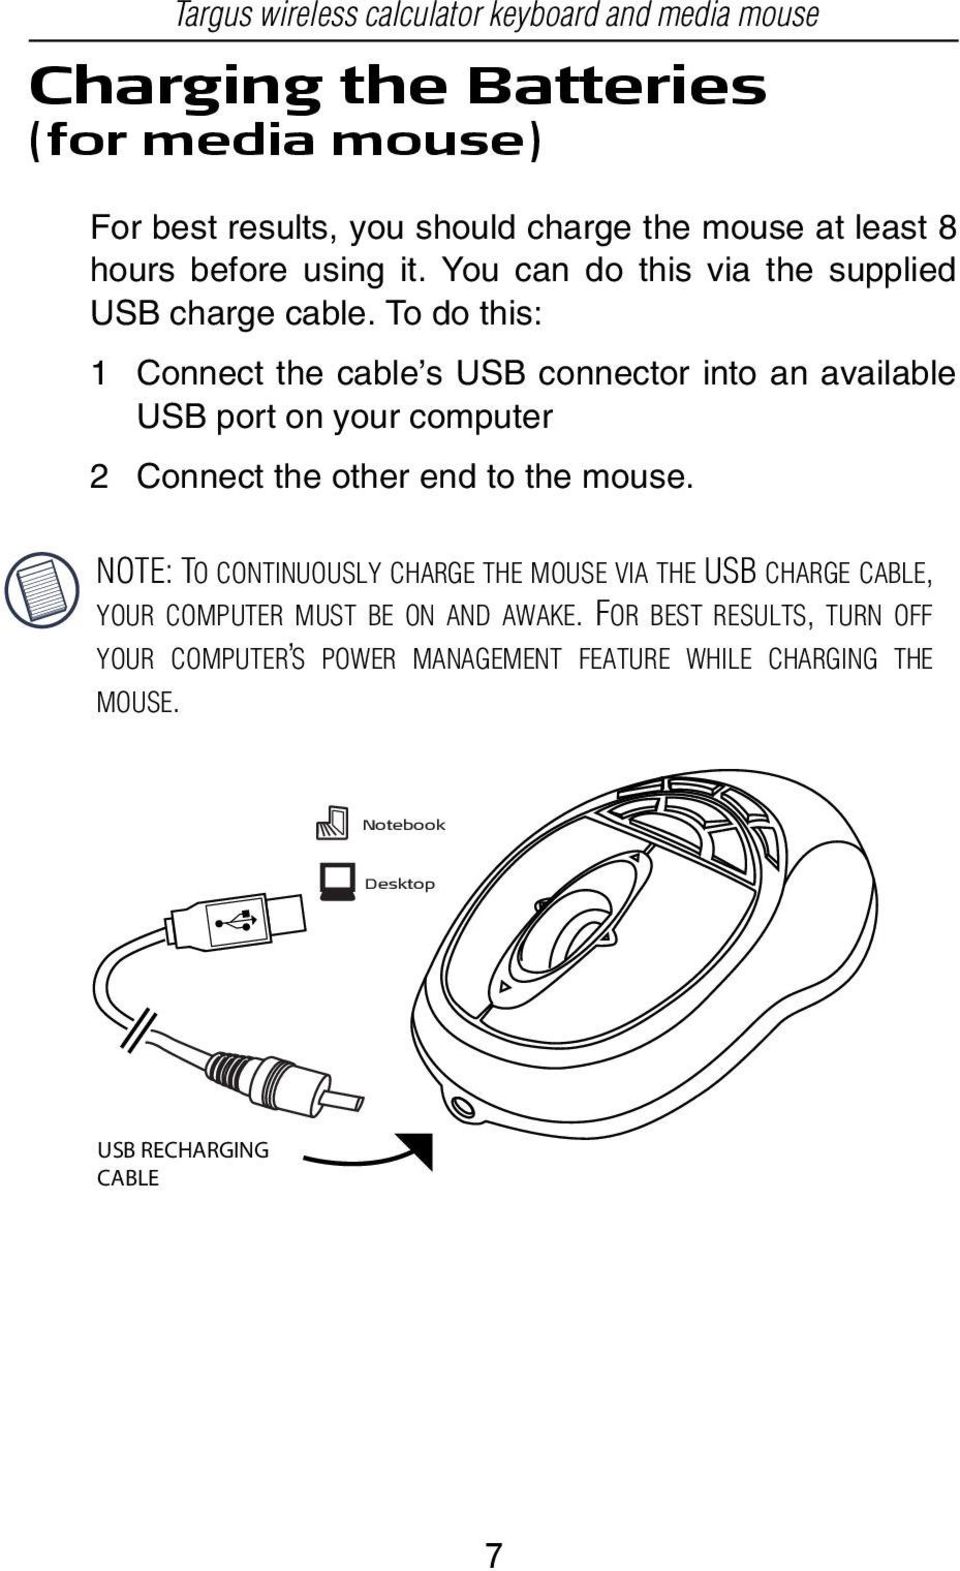 To do this: 1 Connect the cable s USB connector into an available USB port on your computer 2 Connect the other end to the mouse.